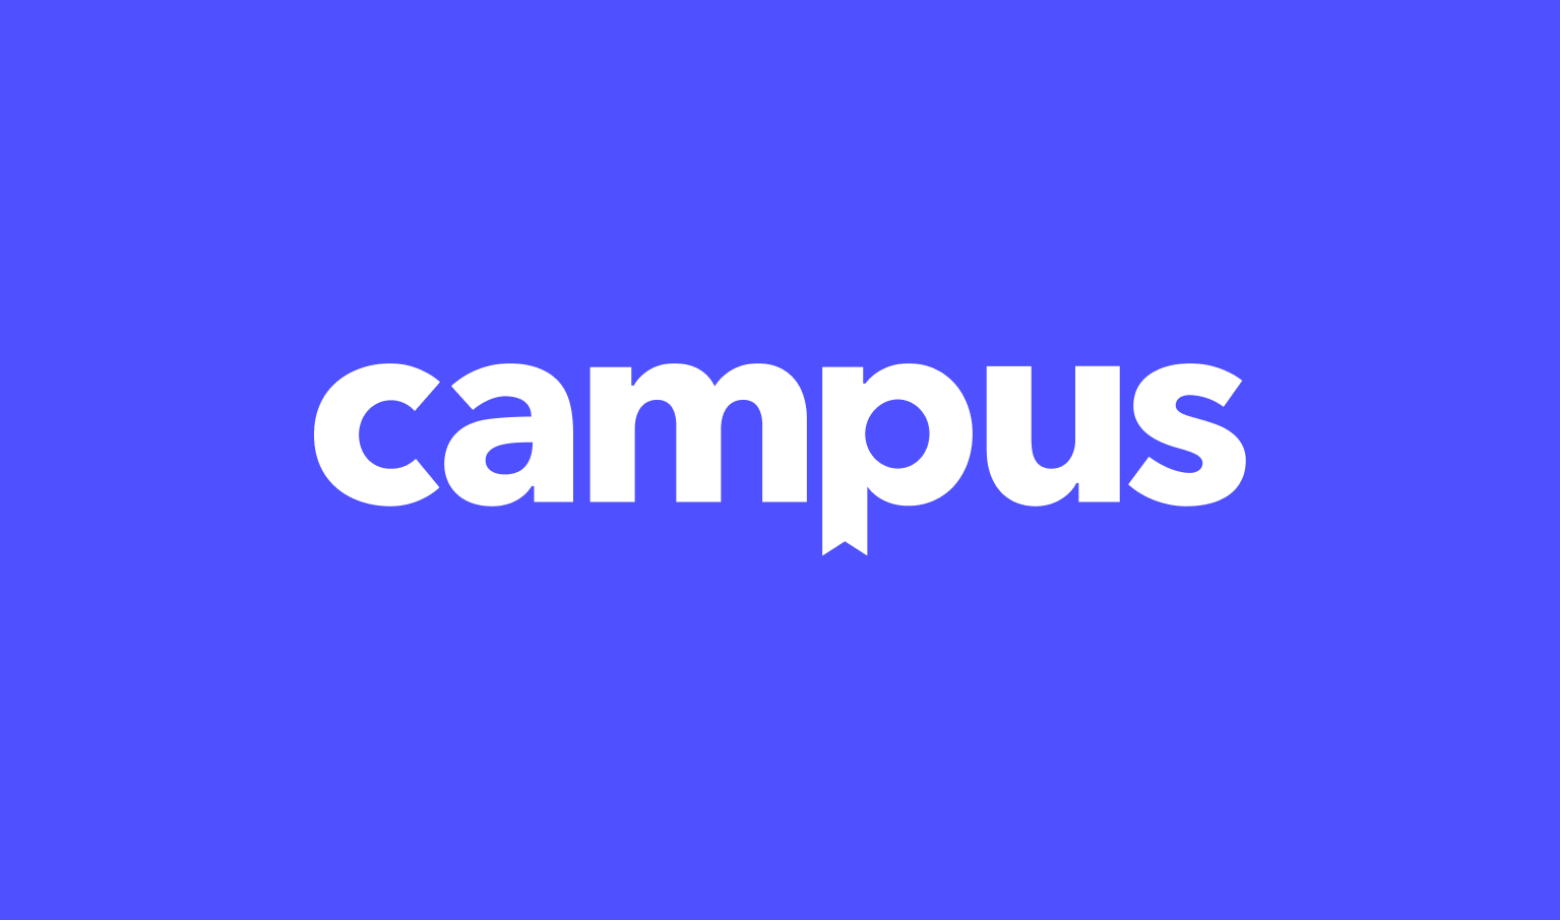 Education startup Campus.edu opens enrollment with $29 million in funding